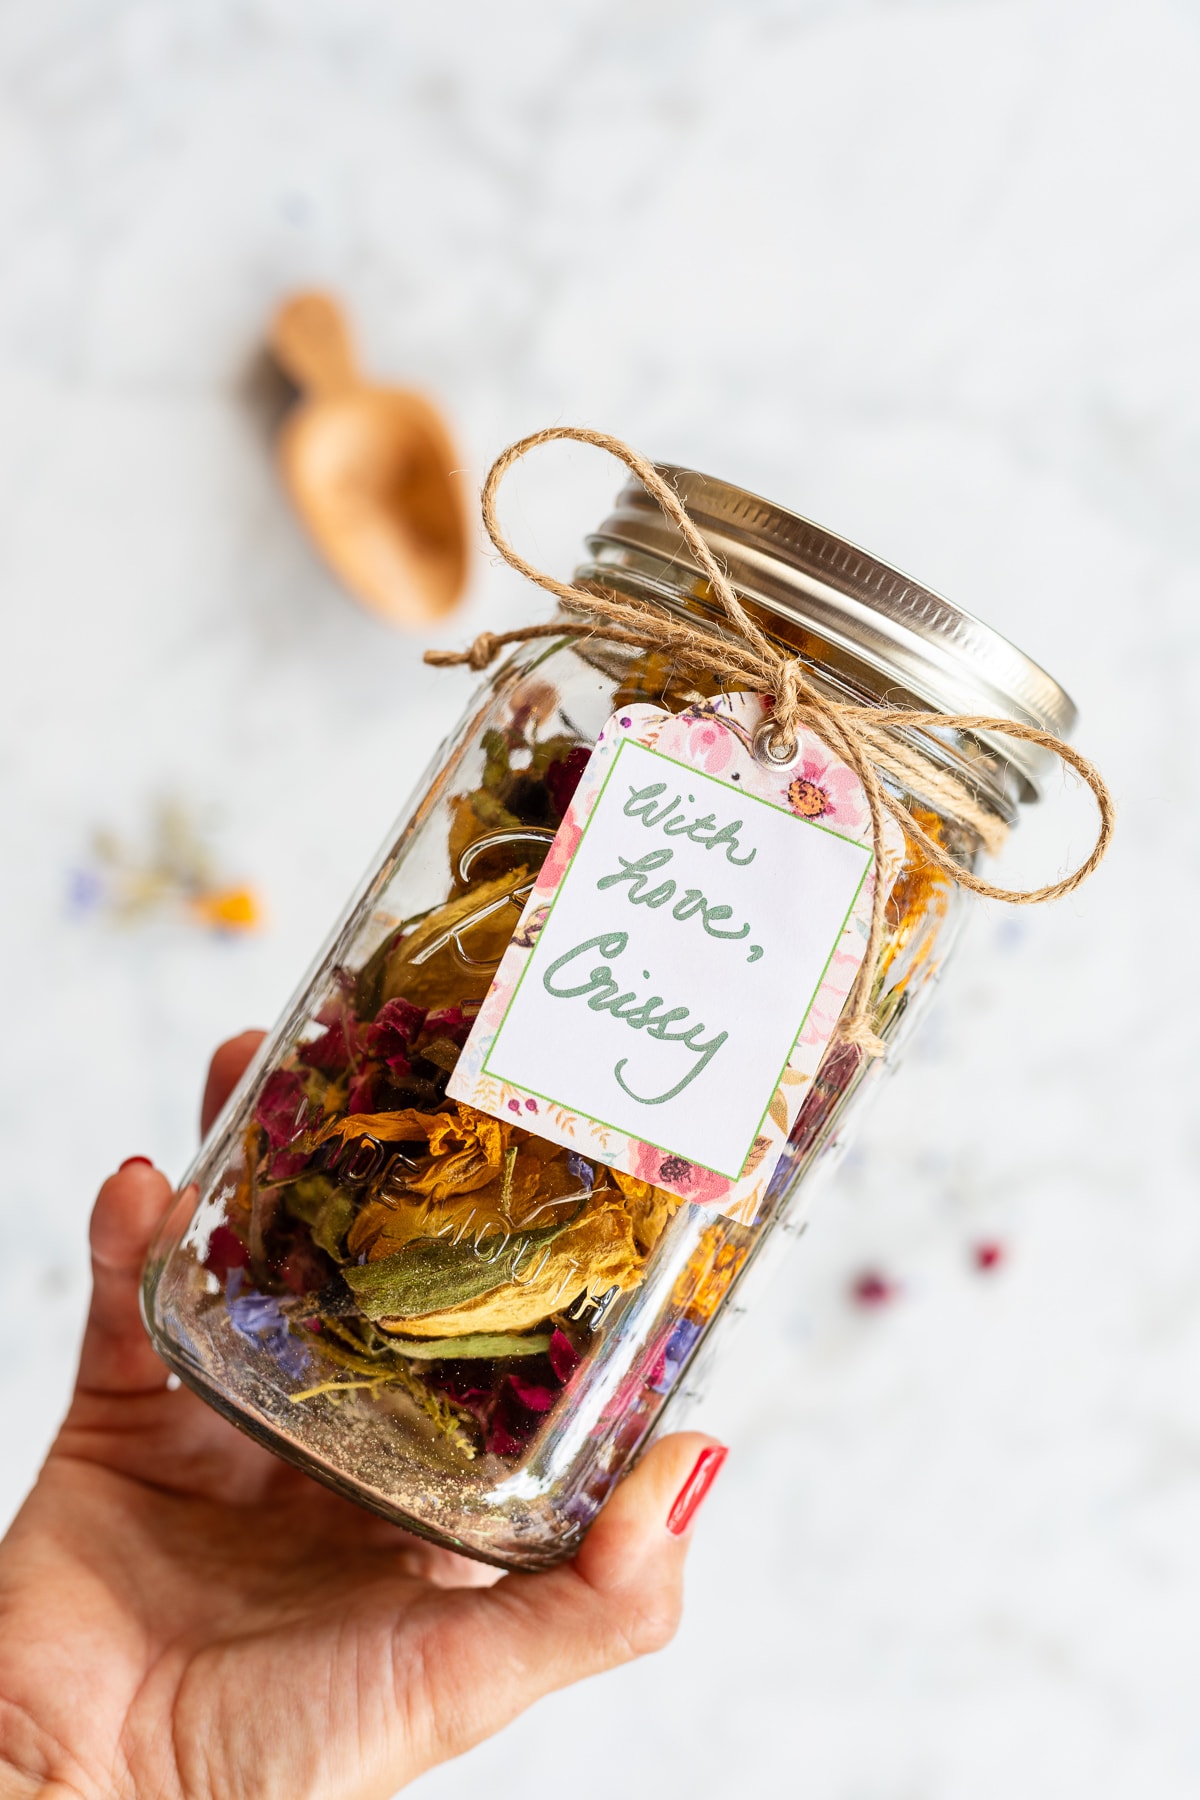 Homemade potpourri packaged as a gift in a mason jar with a gift tag.